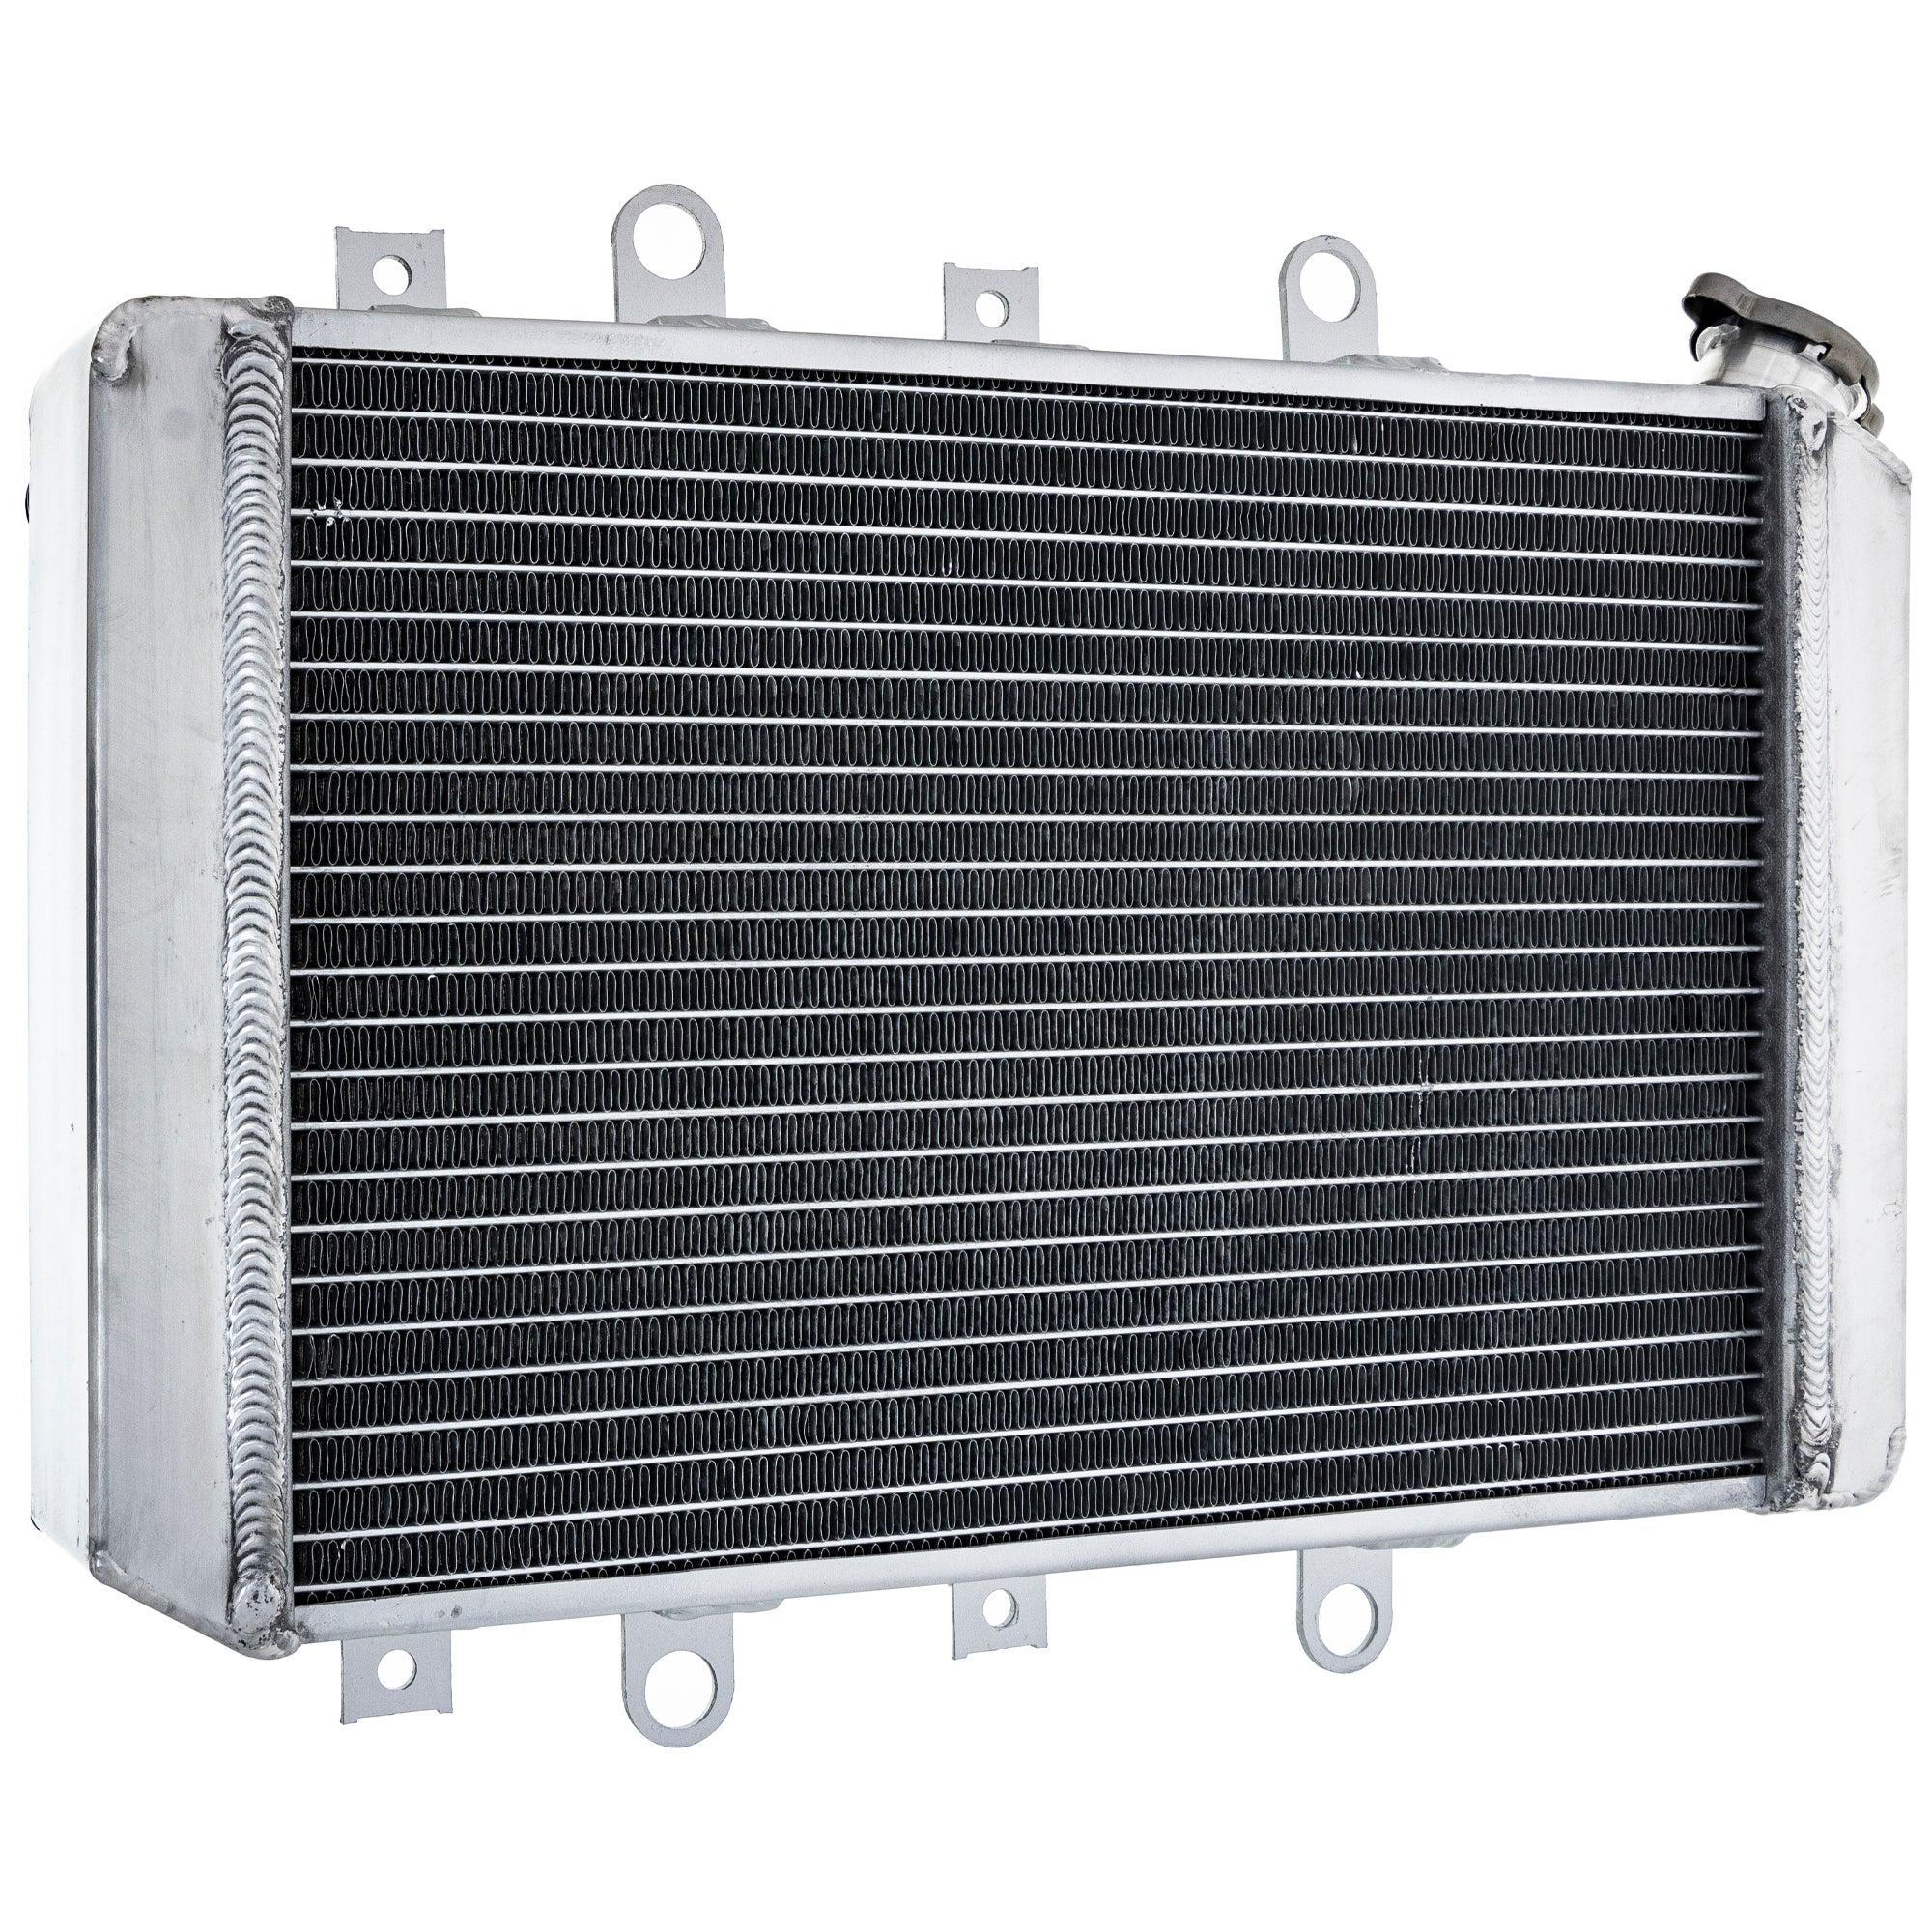 Radiator for Yamaha Grizzly 550 700 YFM550FG 1HP-E2460-00-00 with Cap